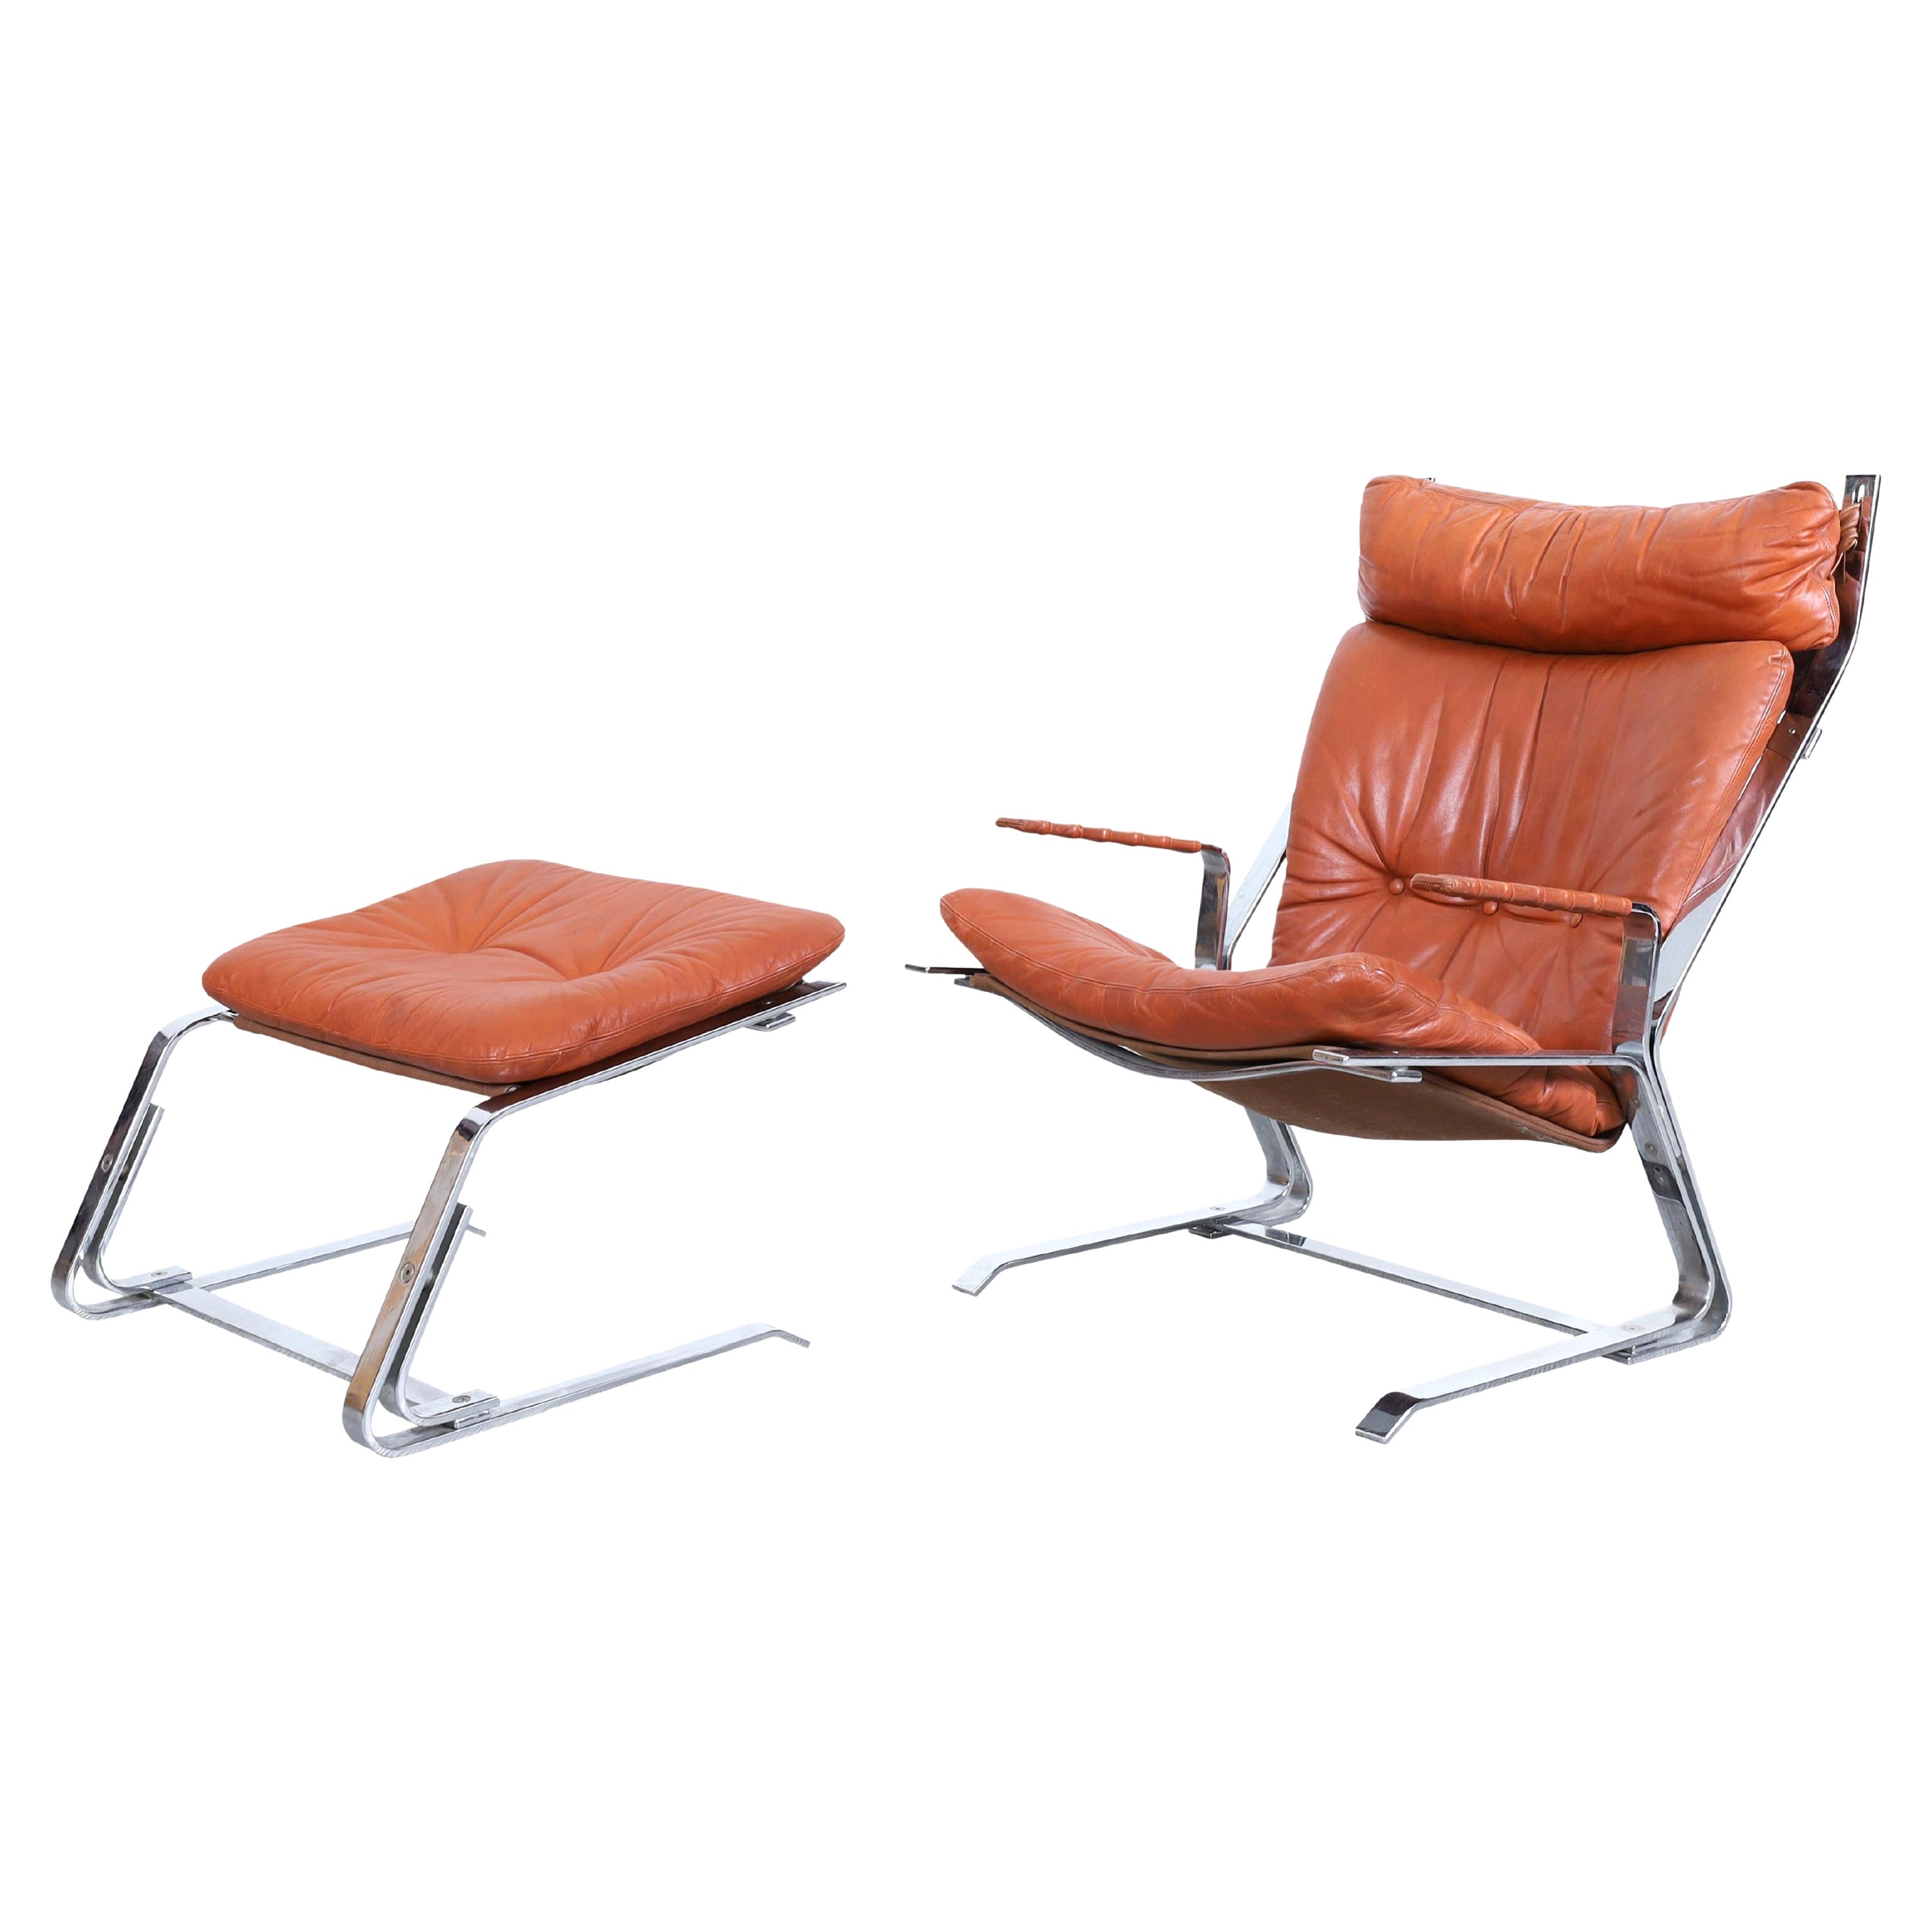 Midcentury Leather Lounge Chair and Ottoman by Elsa and Nordahl Solheim For Sale